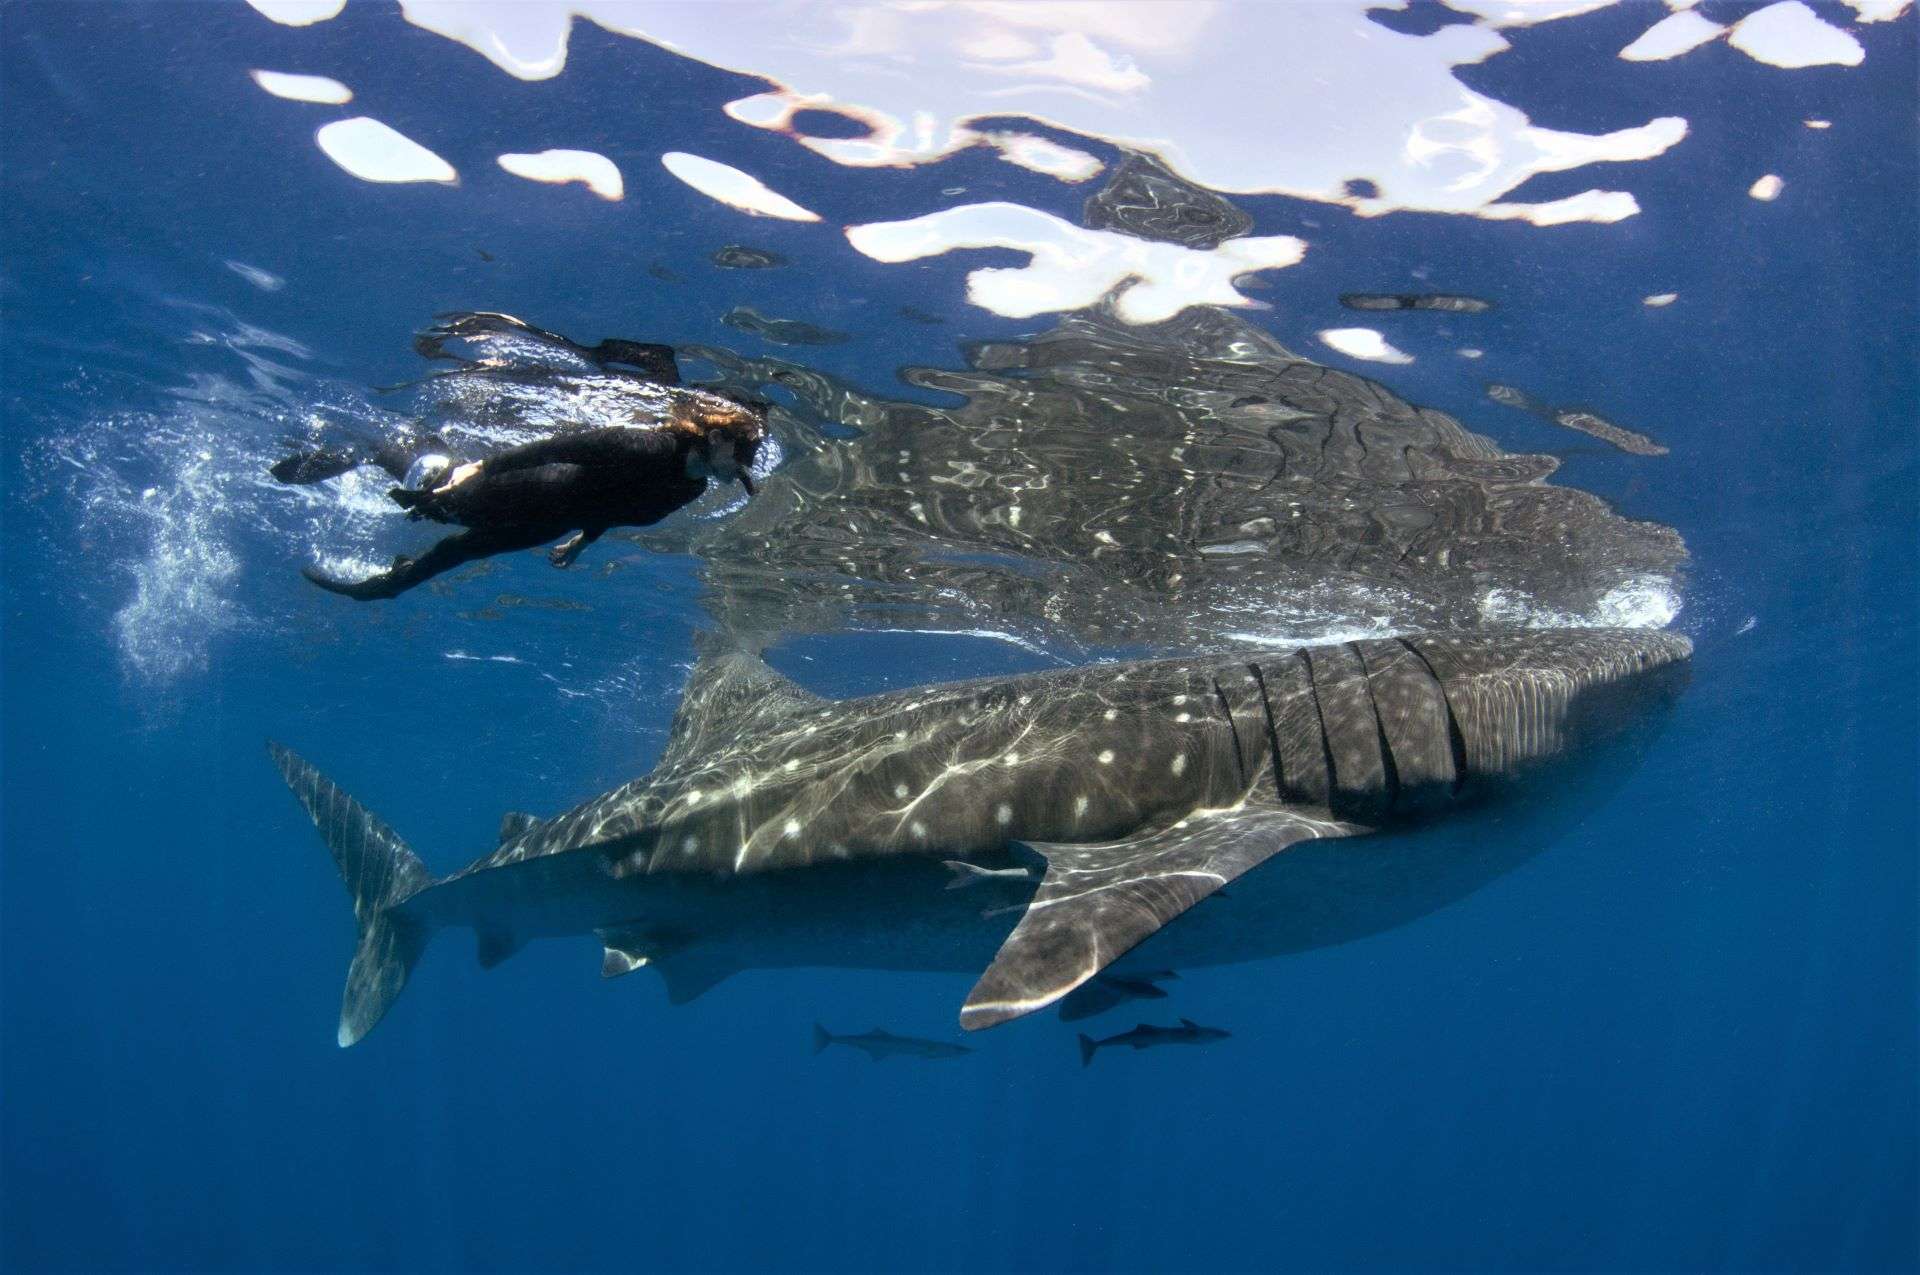 A woman swims along with the world's biggest fish, the whale shark.